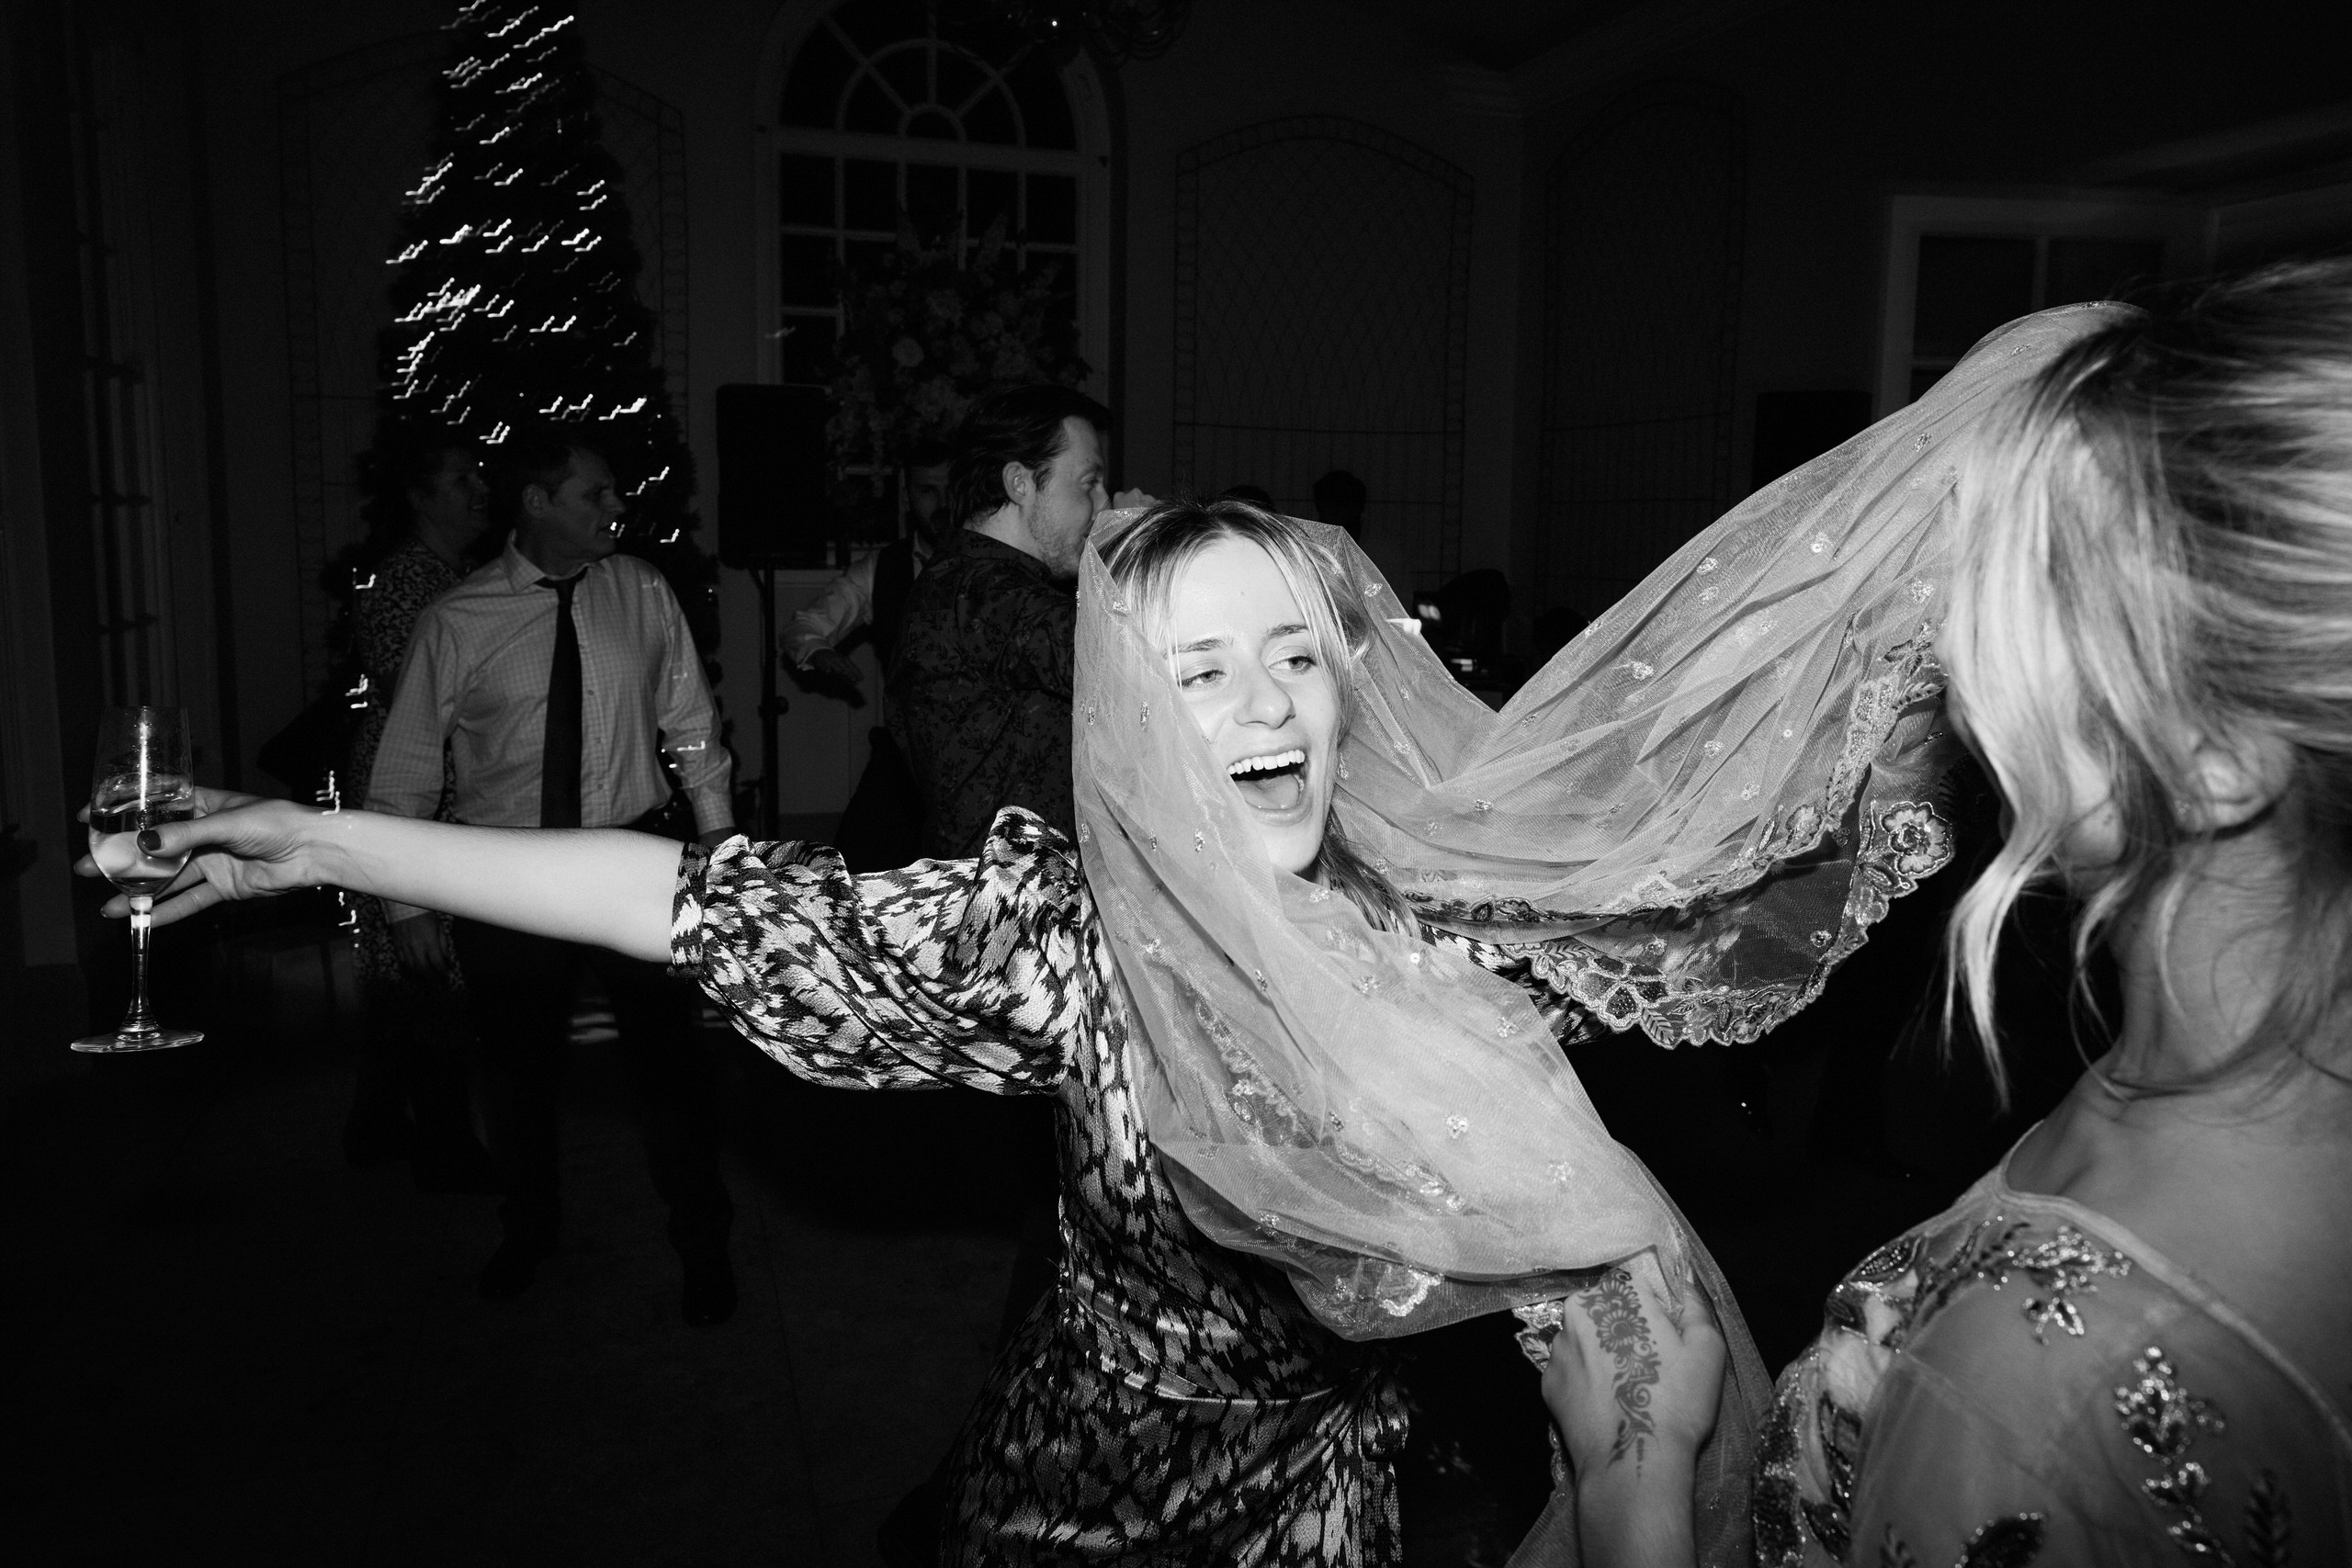 Two women are wearing veils and dancing at a party.